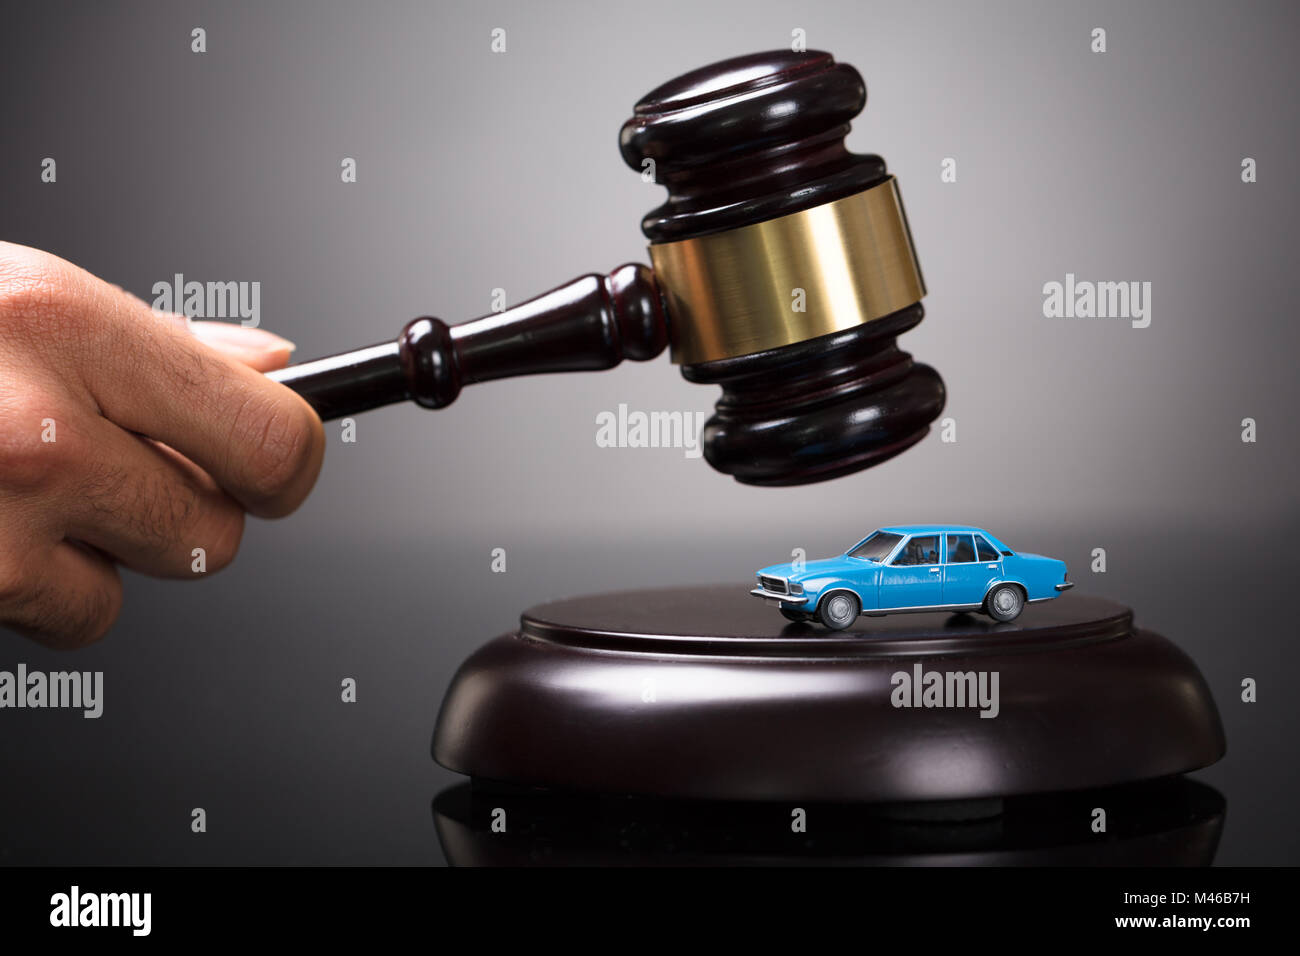 Close-up Of A Judge's Hand Striking Gavel On Small Car In Courtroom Stock Photo